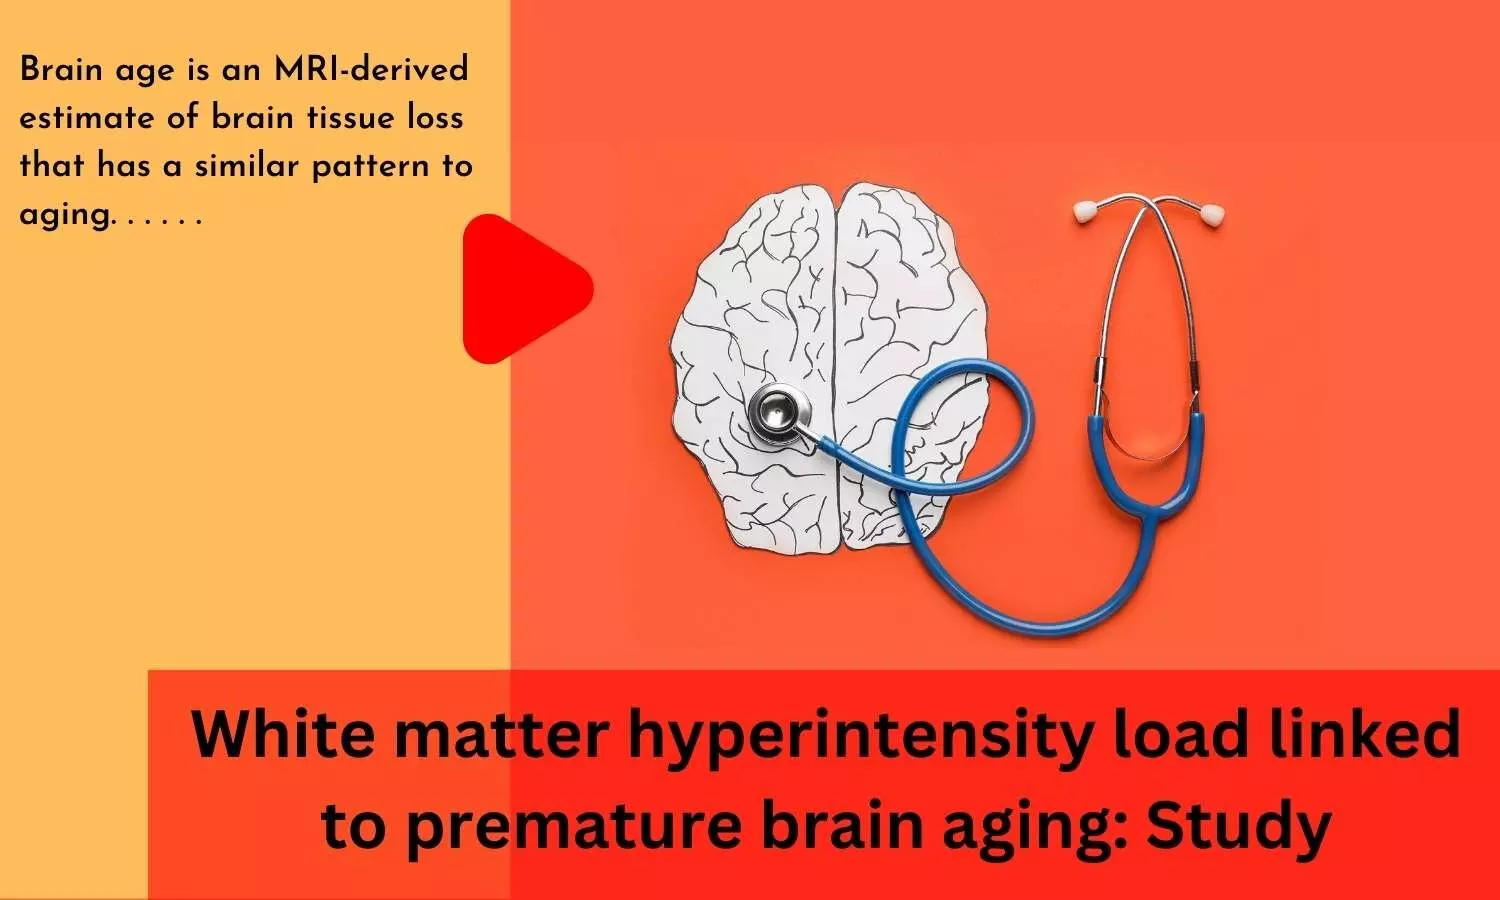 White matter hyperintensity load linked to premature brain aging: Study